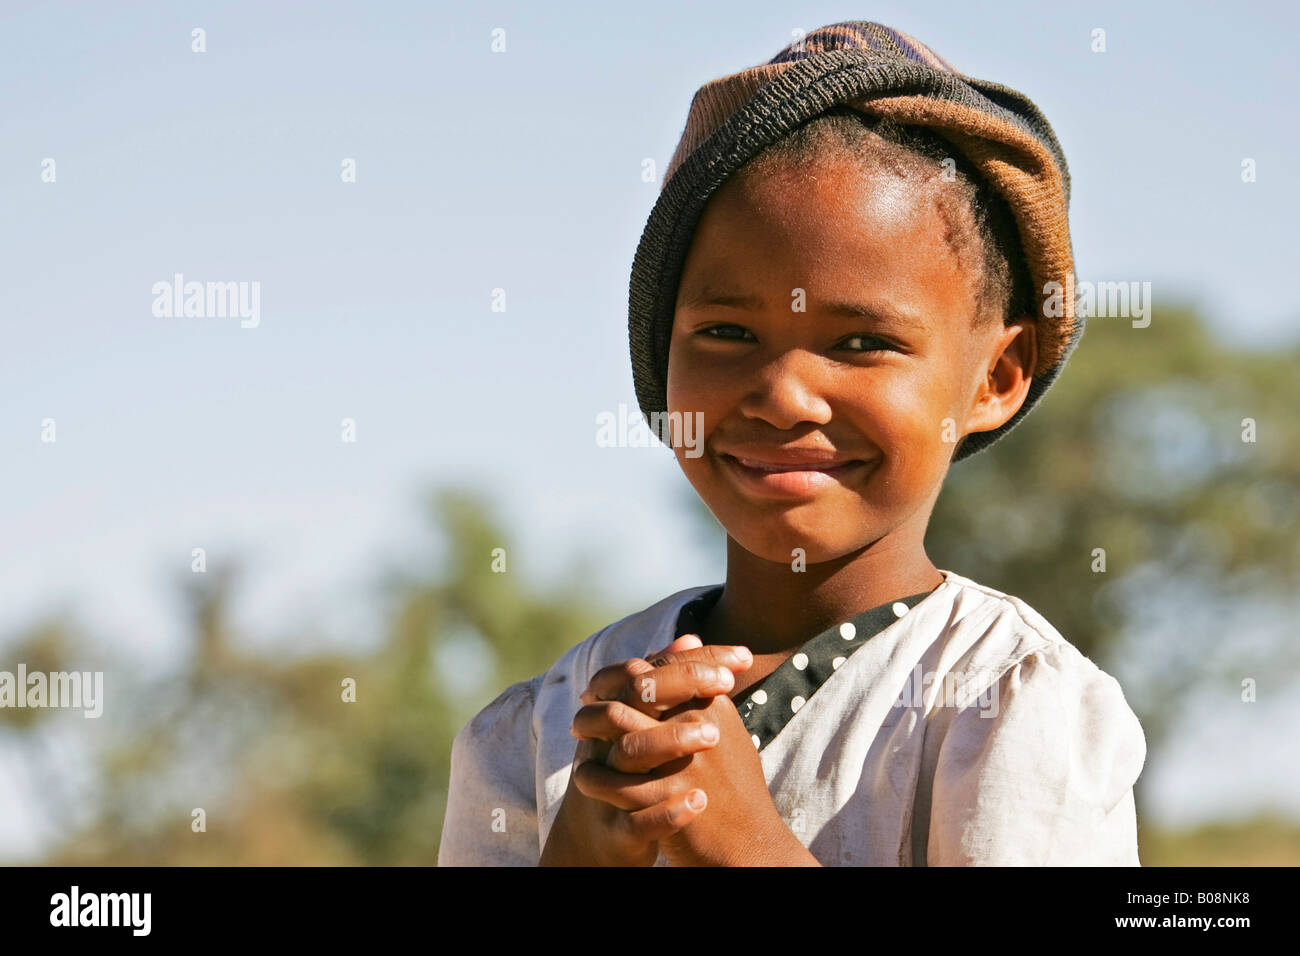 Young smiling Namibian girl, Southern Namibia, Africa Stock Photo